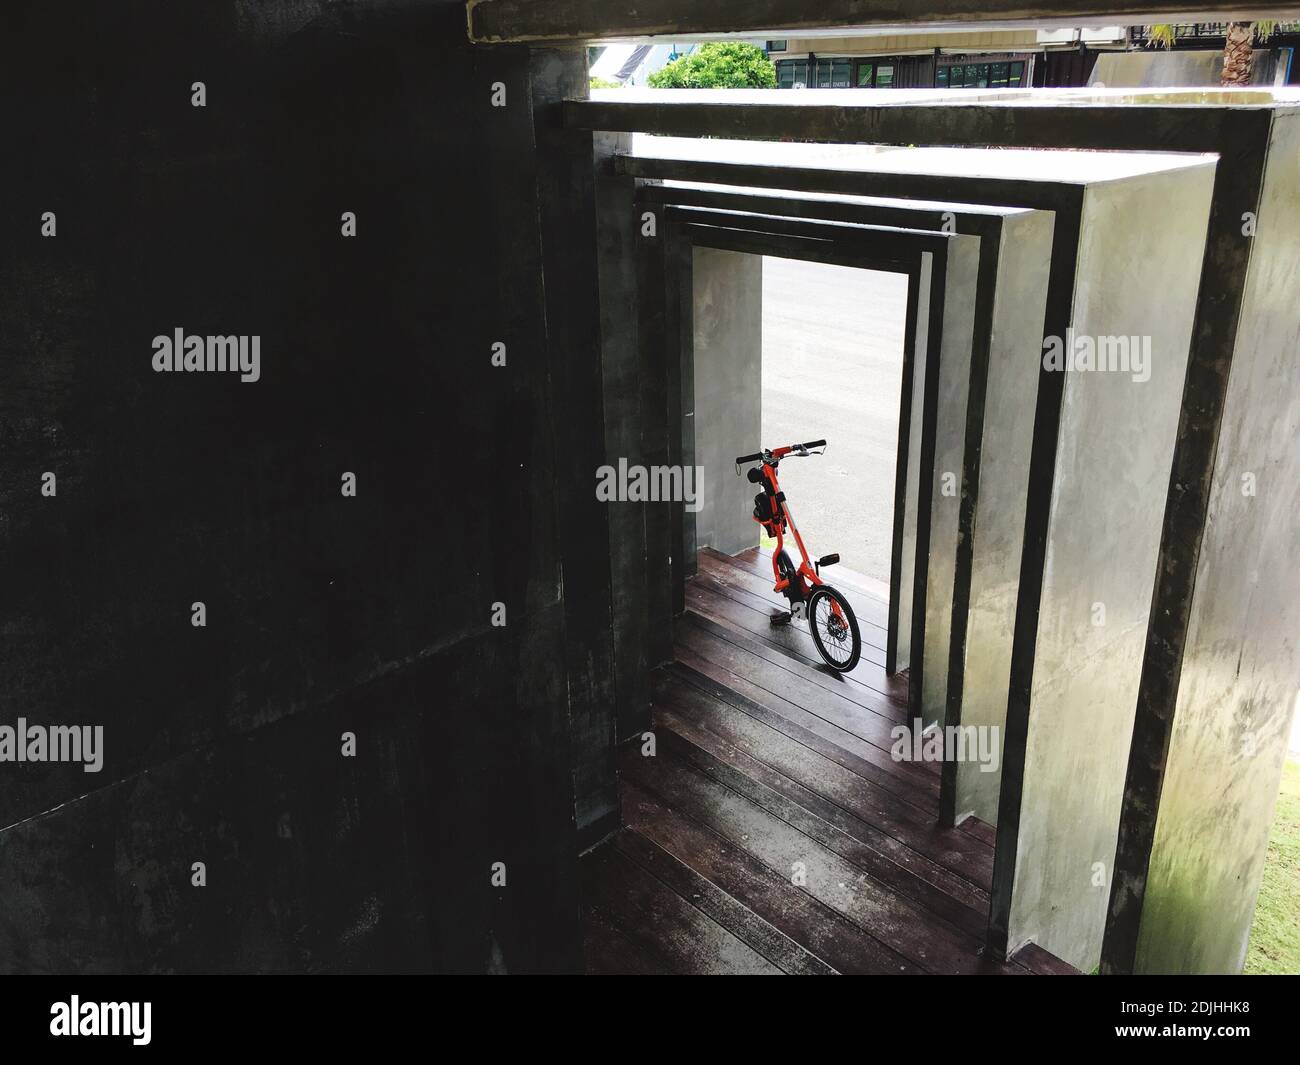 High Angle View Of Bicycle In Corridor Stock Photo